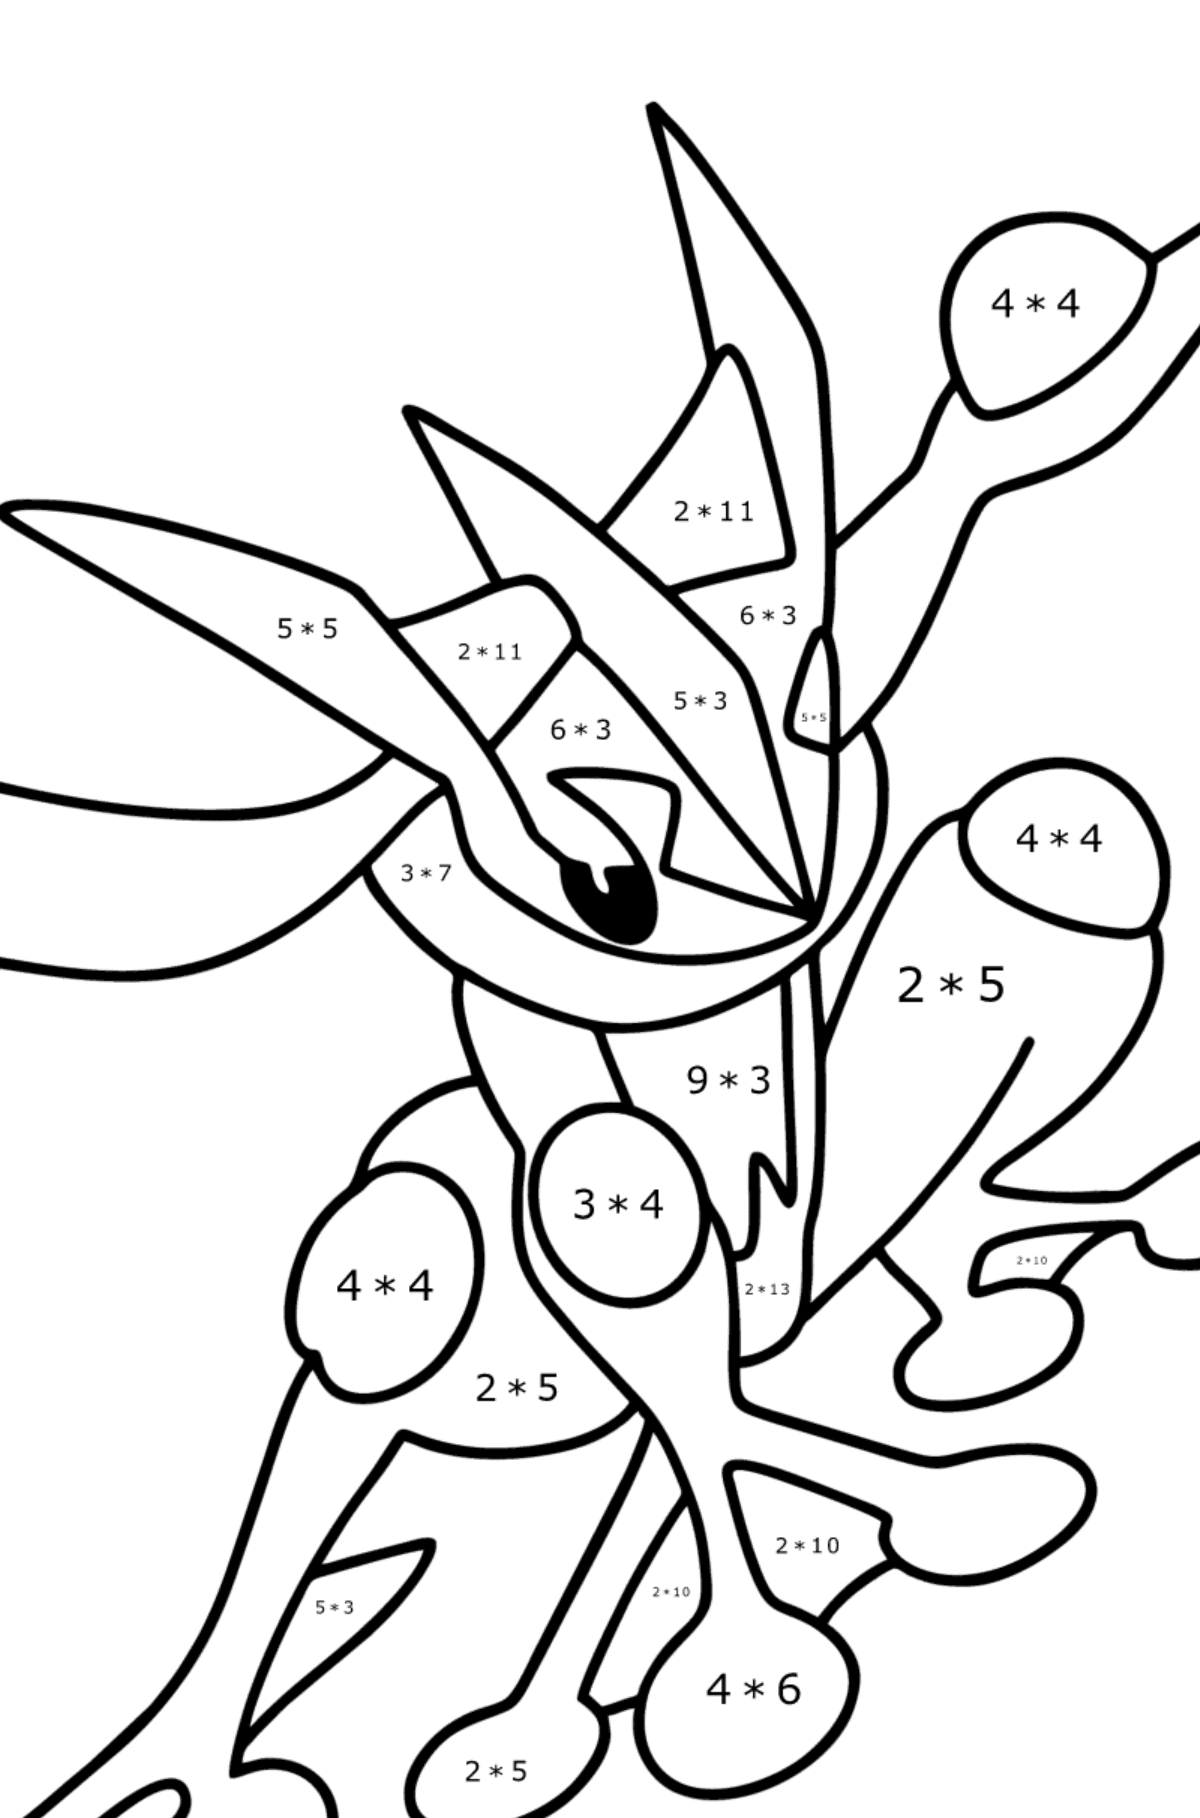 Coloring page Pokemon Go Greninja - Math Coloring - Multiplication for Kids